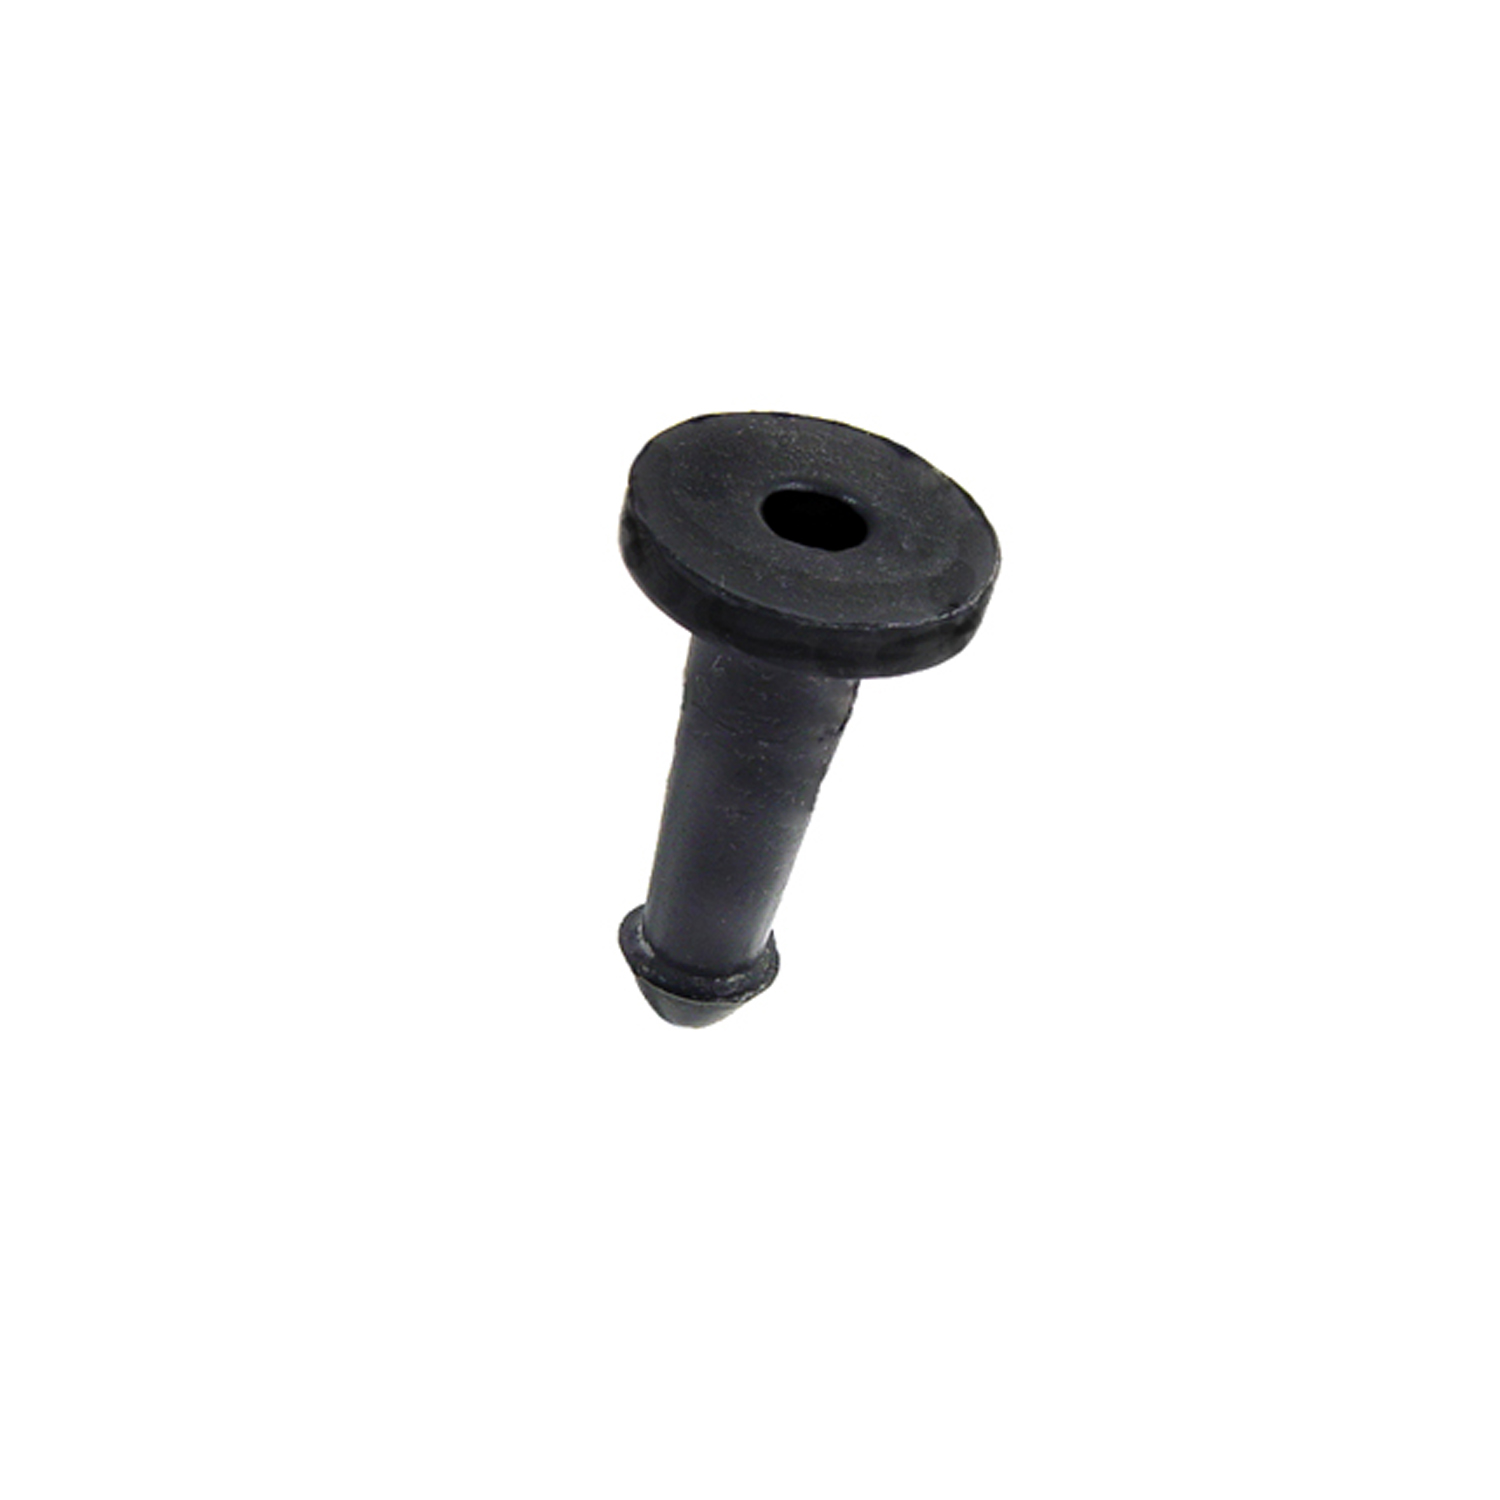 1973 Plymouth Valiant Firewall to Dash Insulation Fastener.  Made of black rubber-SM 80-B